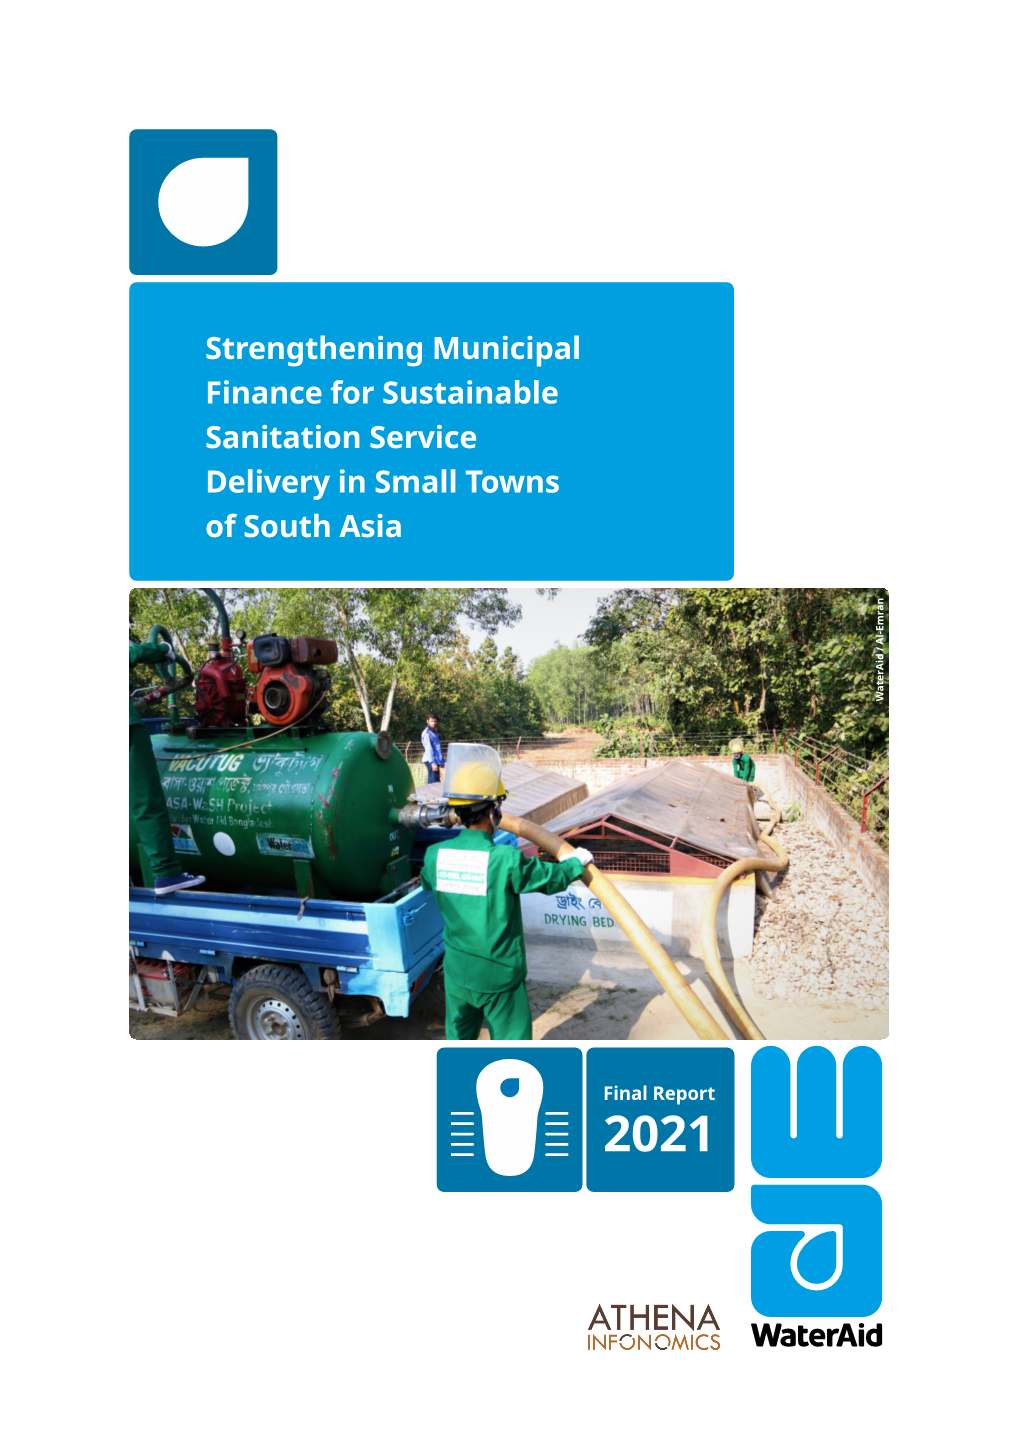 Strengthening Municipal Finance for Sustainable Sanitation Service Delivery in Small Towns of South Asia Wateraid / Al-Emran Wateraid